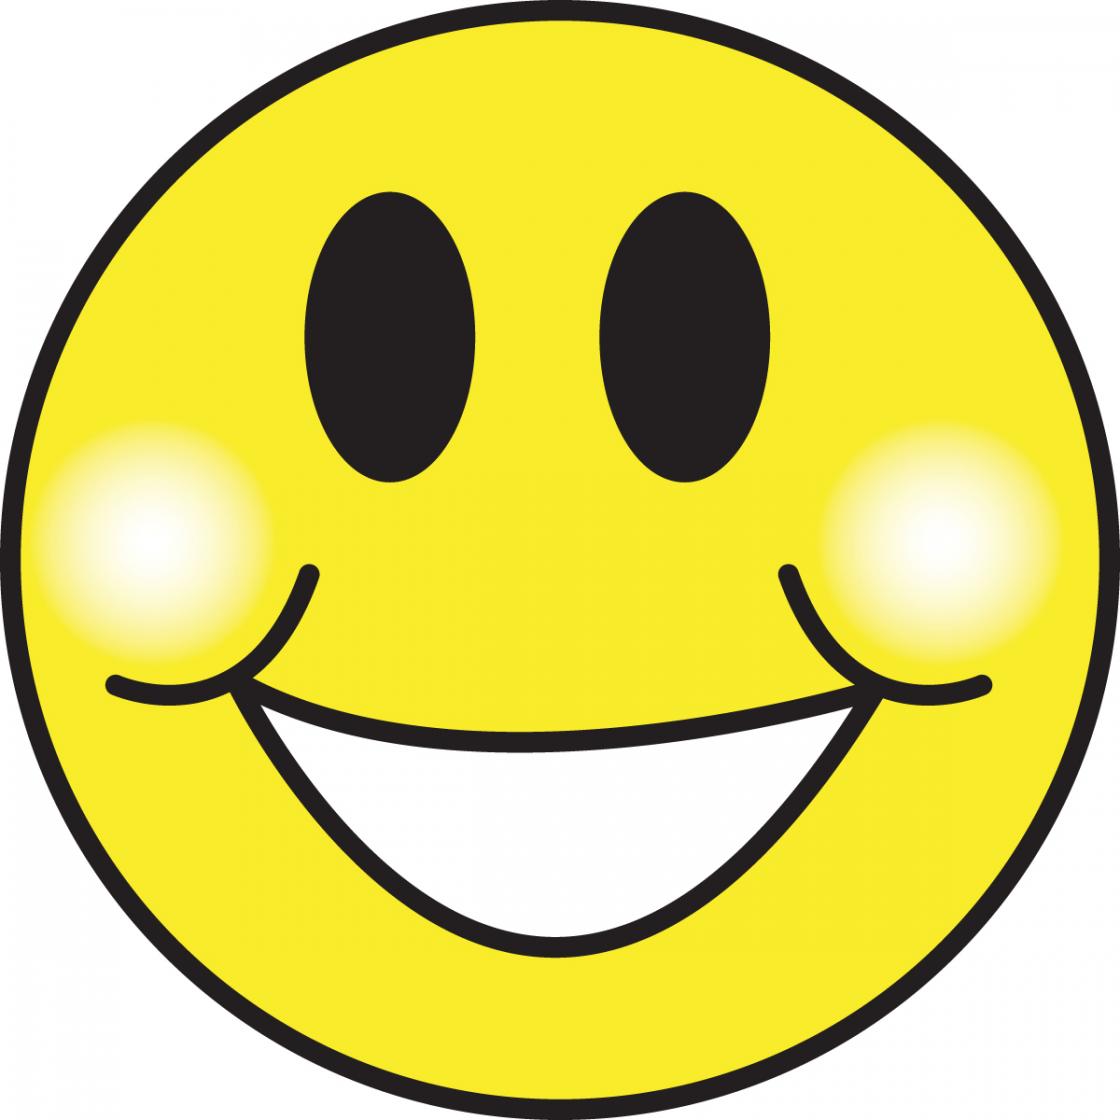 Angry Smiley Faces | Smile Day Site - ClipArt Best - ClipArt Best